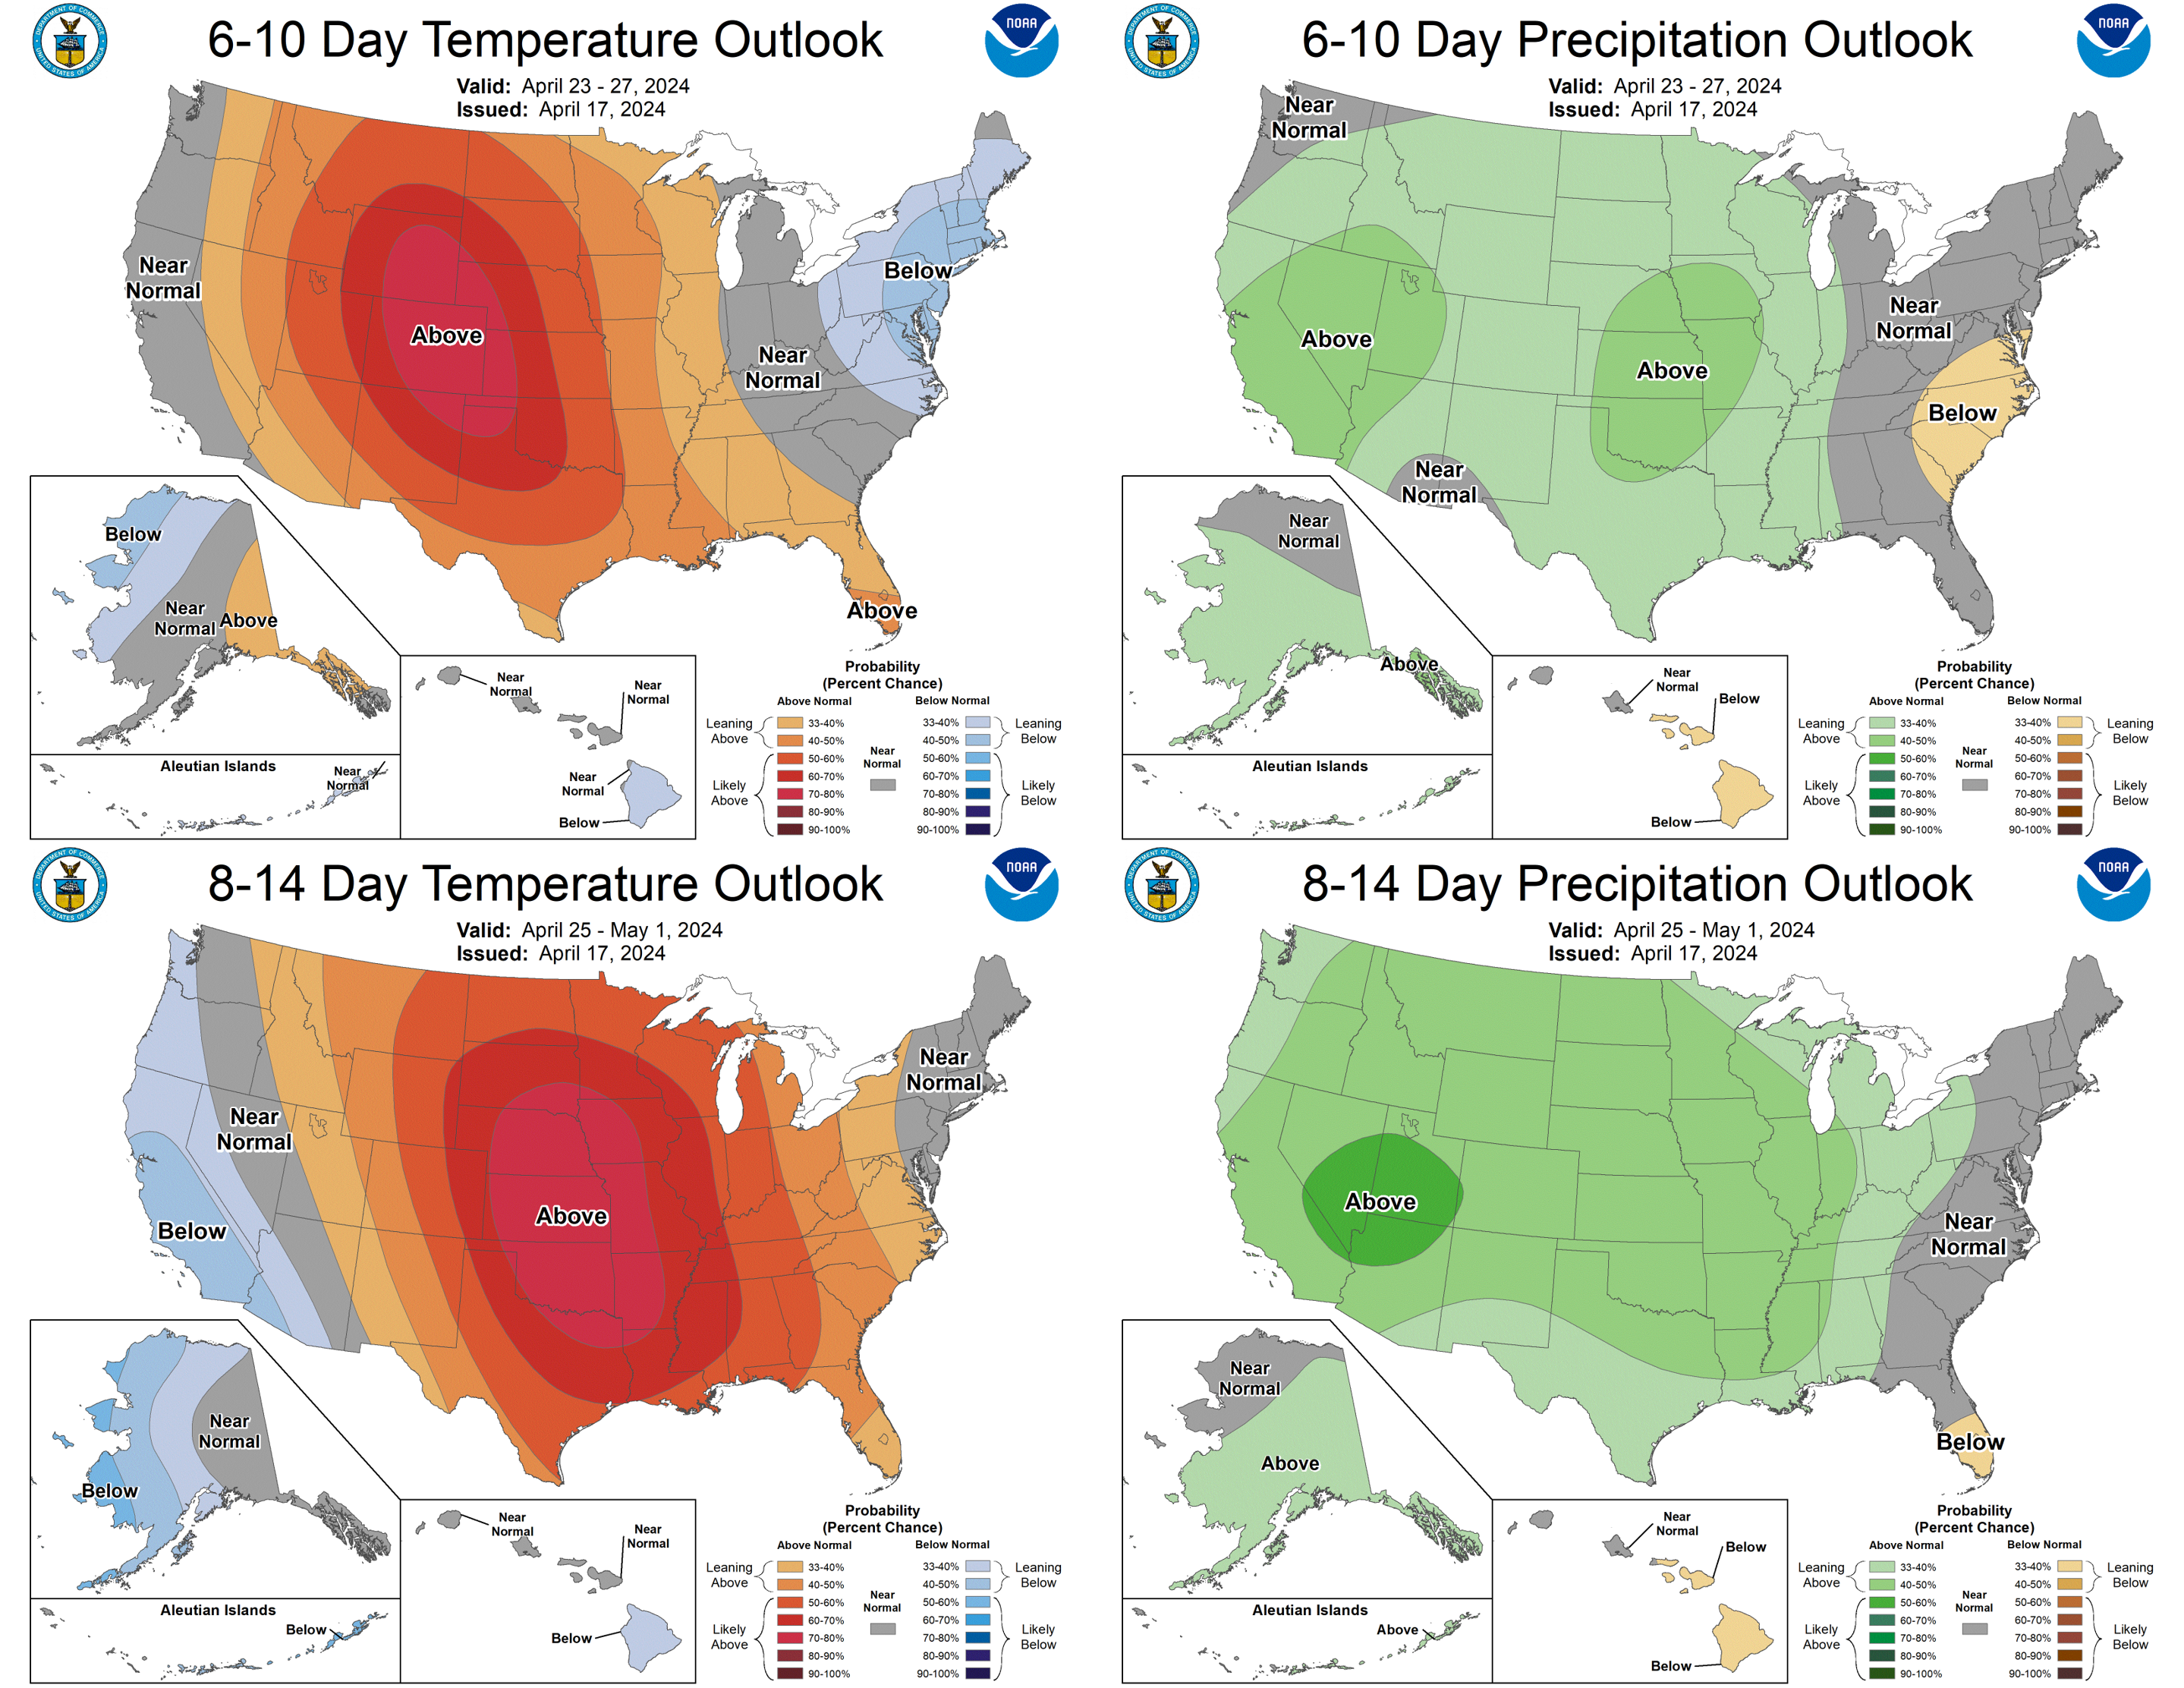 6-10 and 8-14 day weather outlooks.